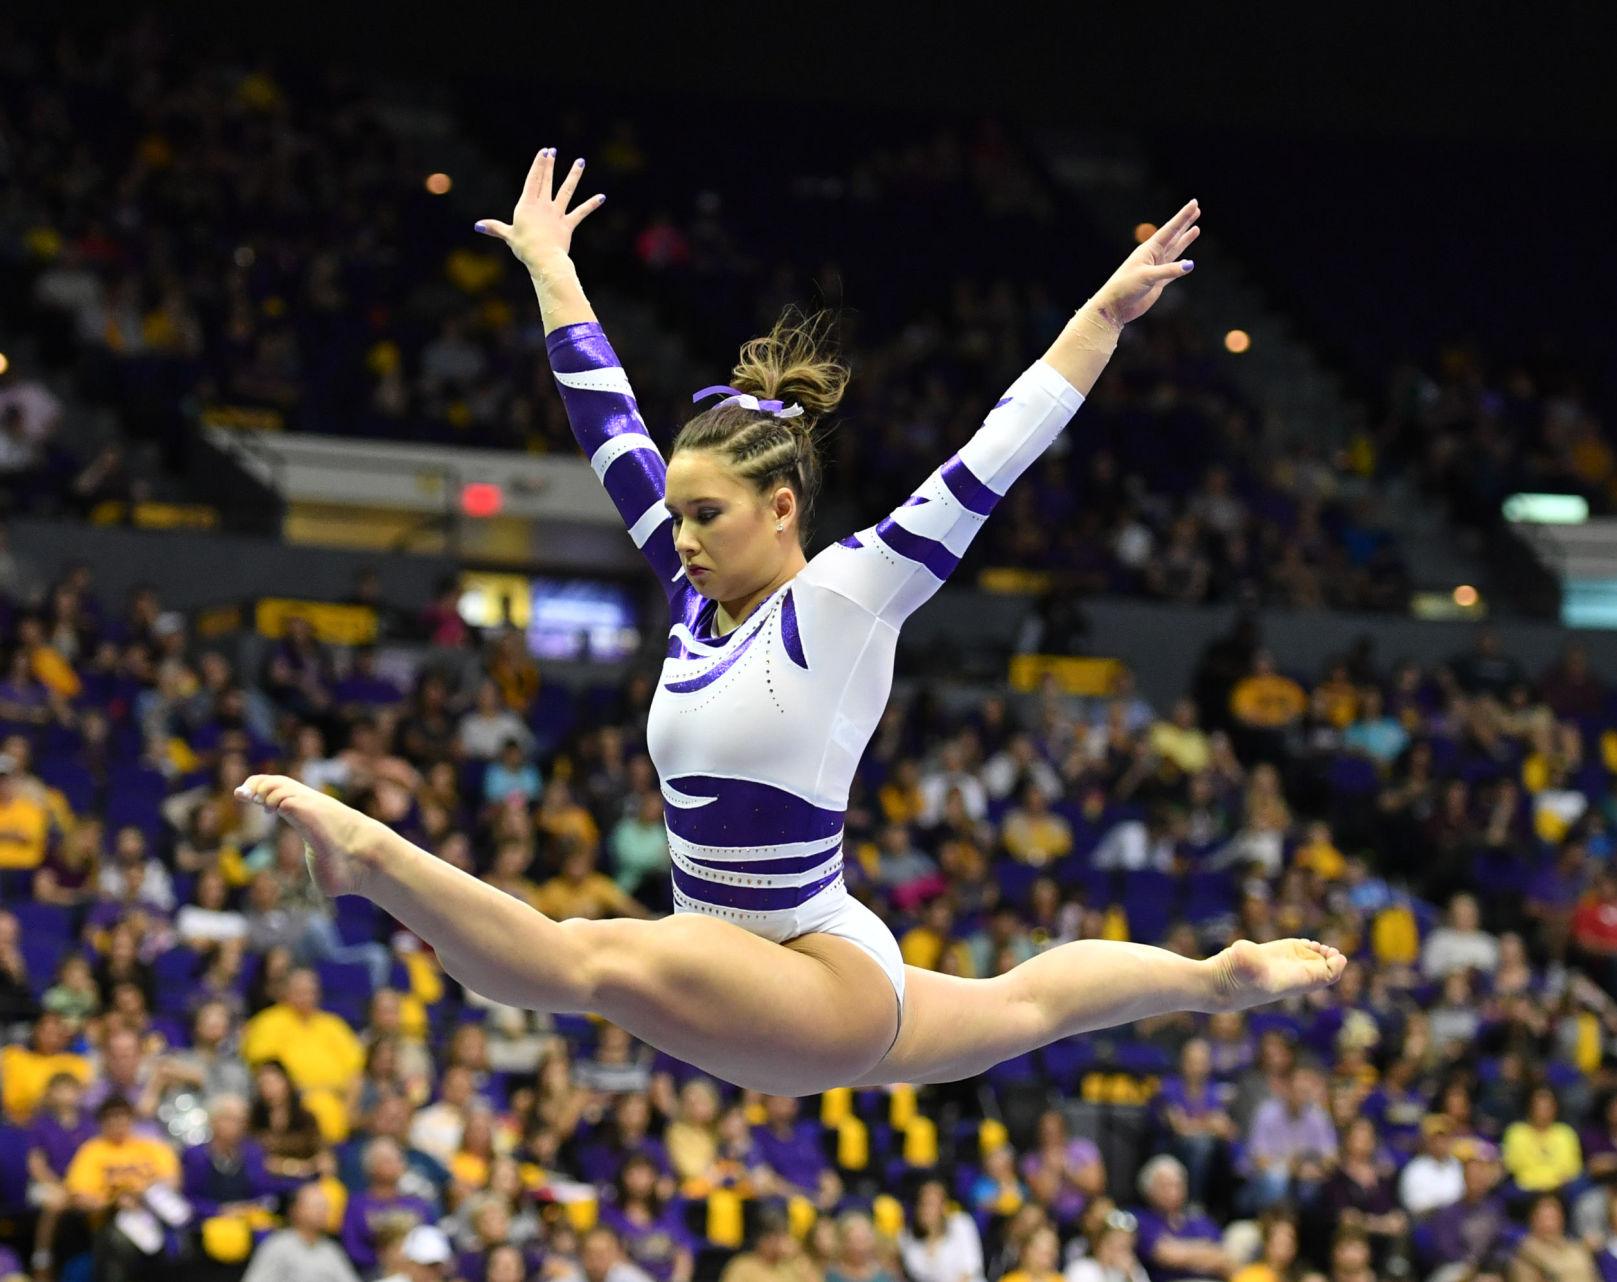 Another Emotional Journey Home This One A Happy One Awaits Lsu Gymnast Sarah Finnegan This